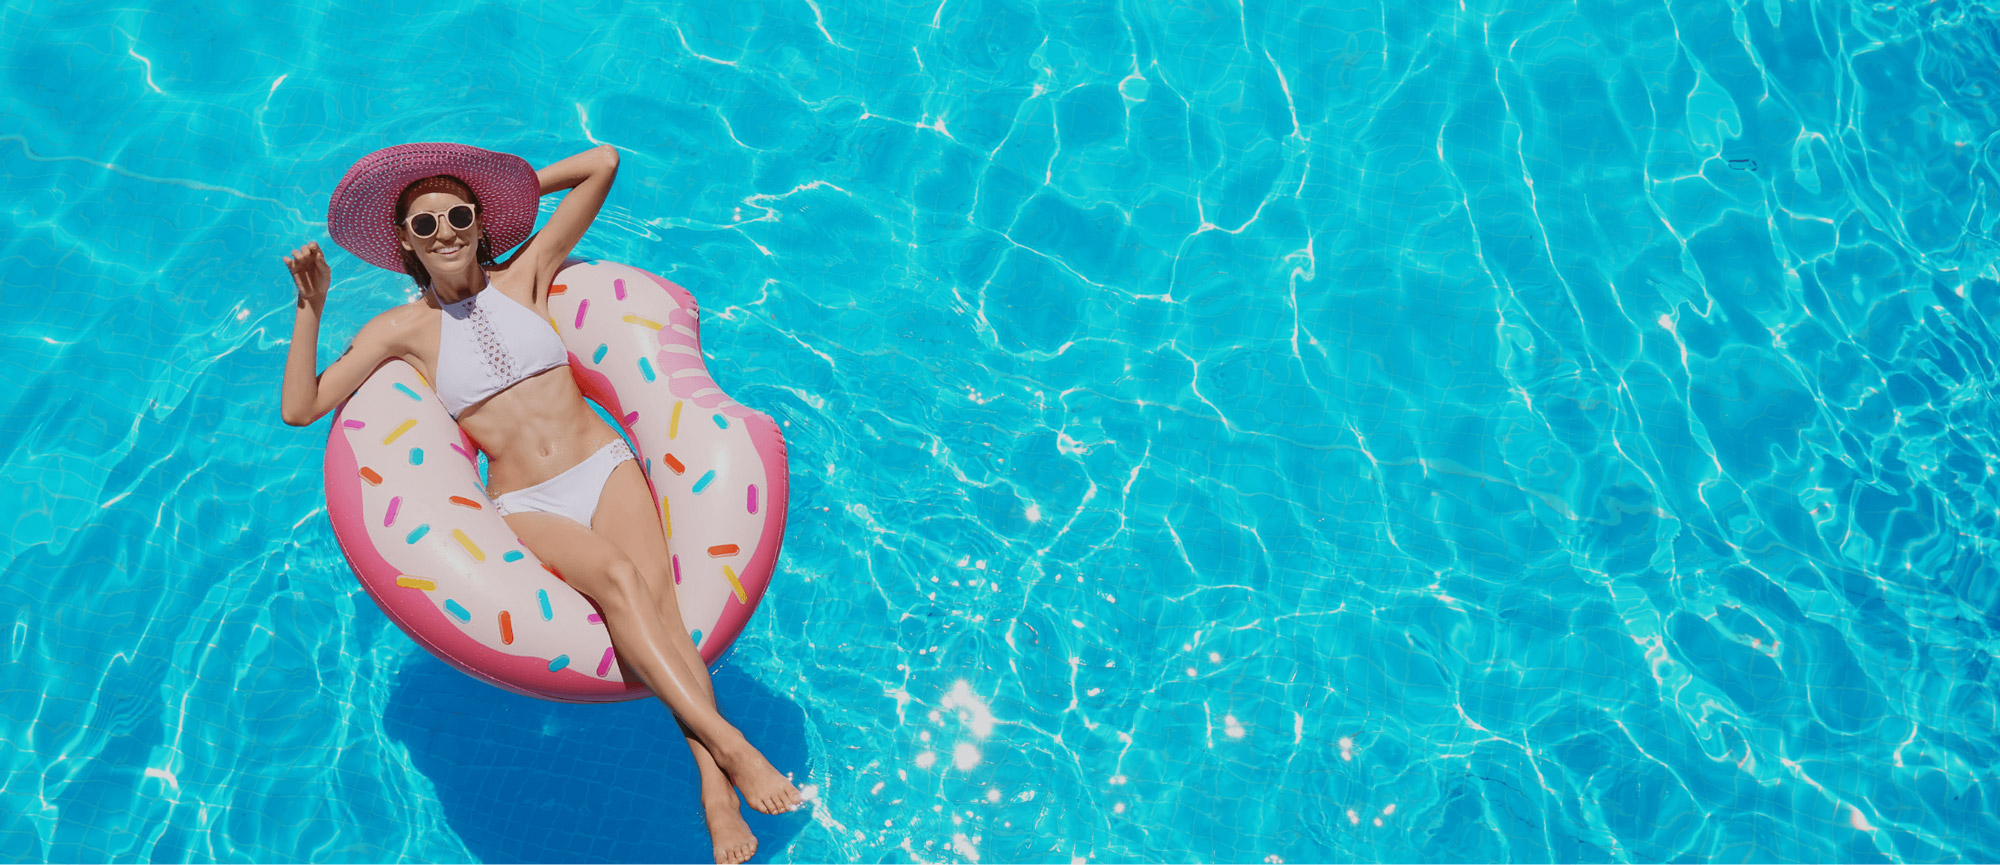 Our Top 3 Tips For Choosing The Right Pool For Your Backyard